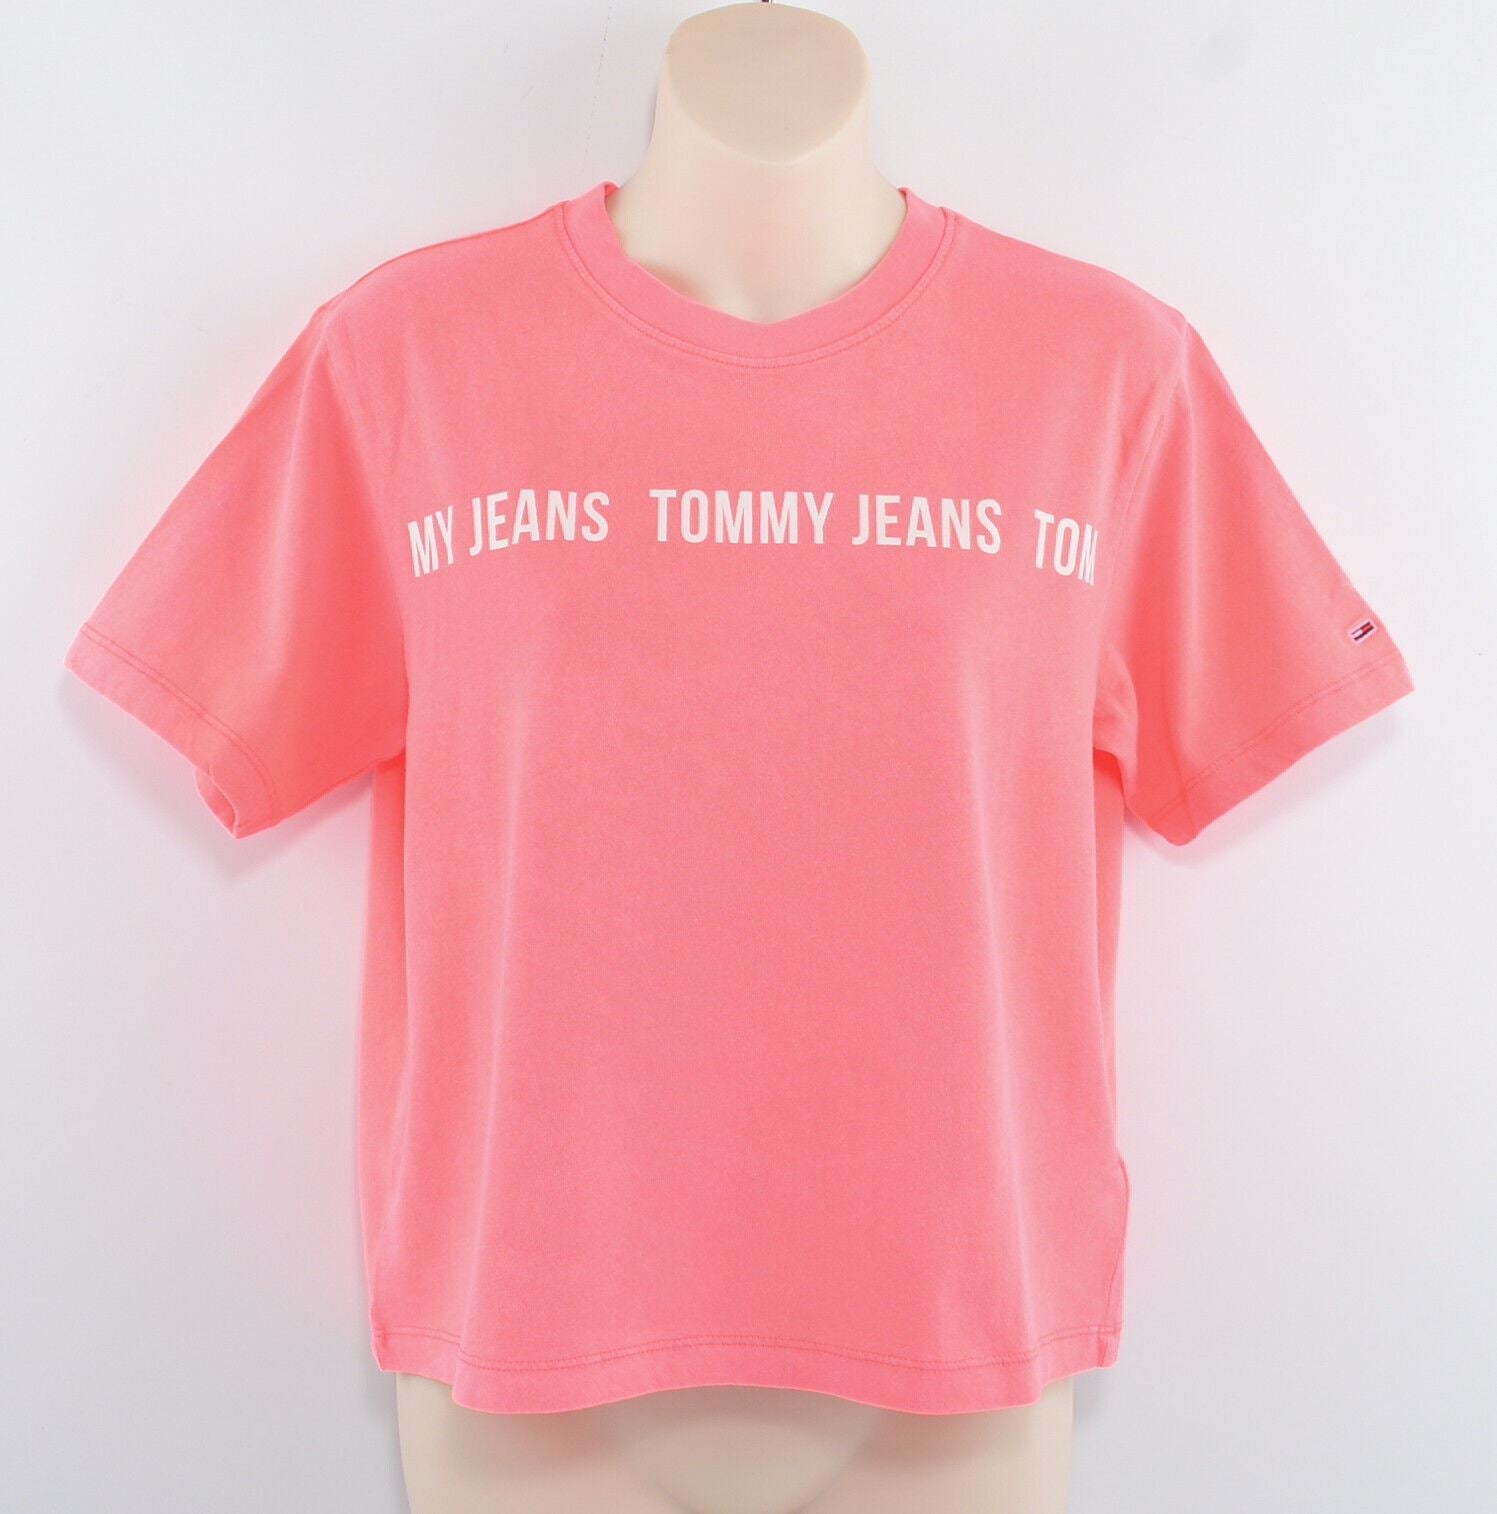 TOMMY HILFIGER - TOMMY JEANS Women's Cropped Tee, Diva Pink, size XS